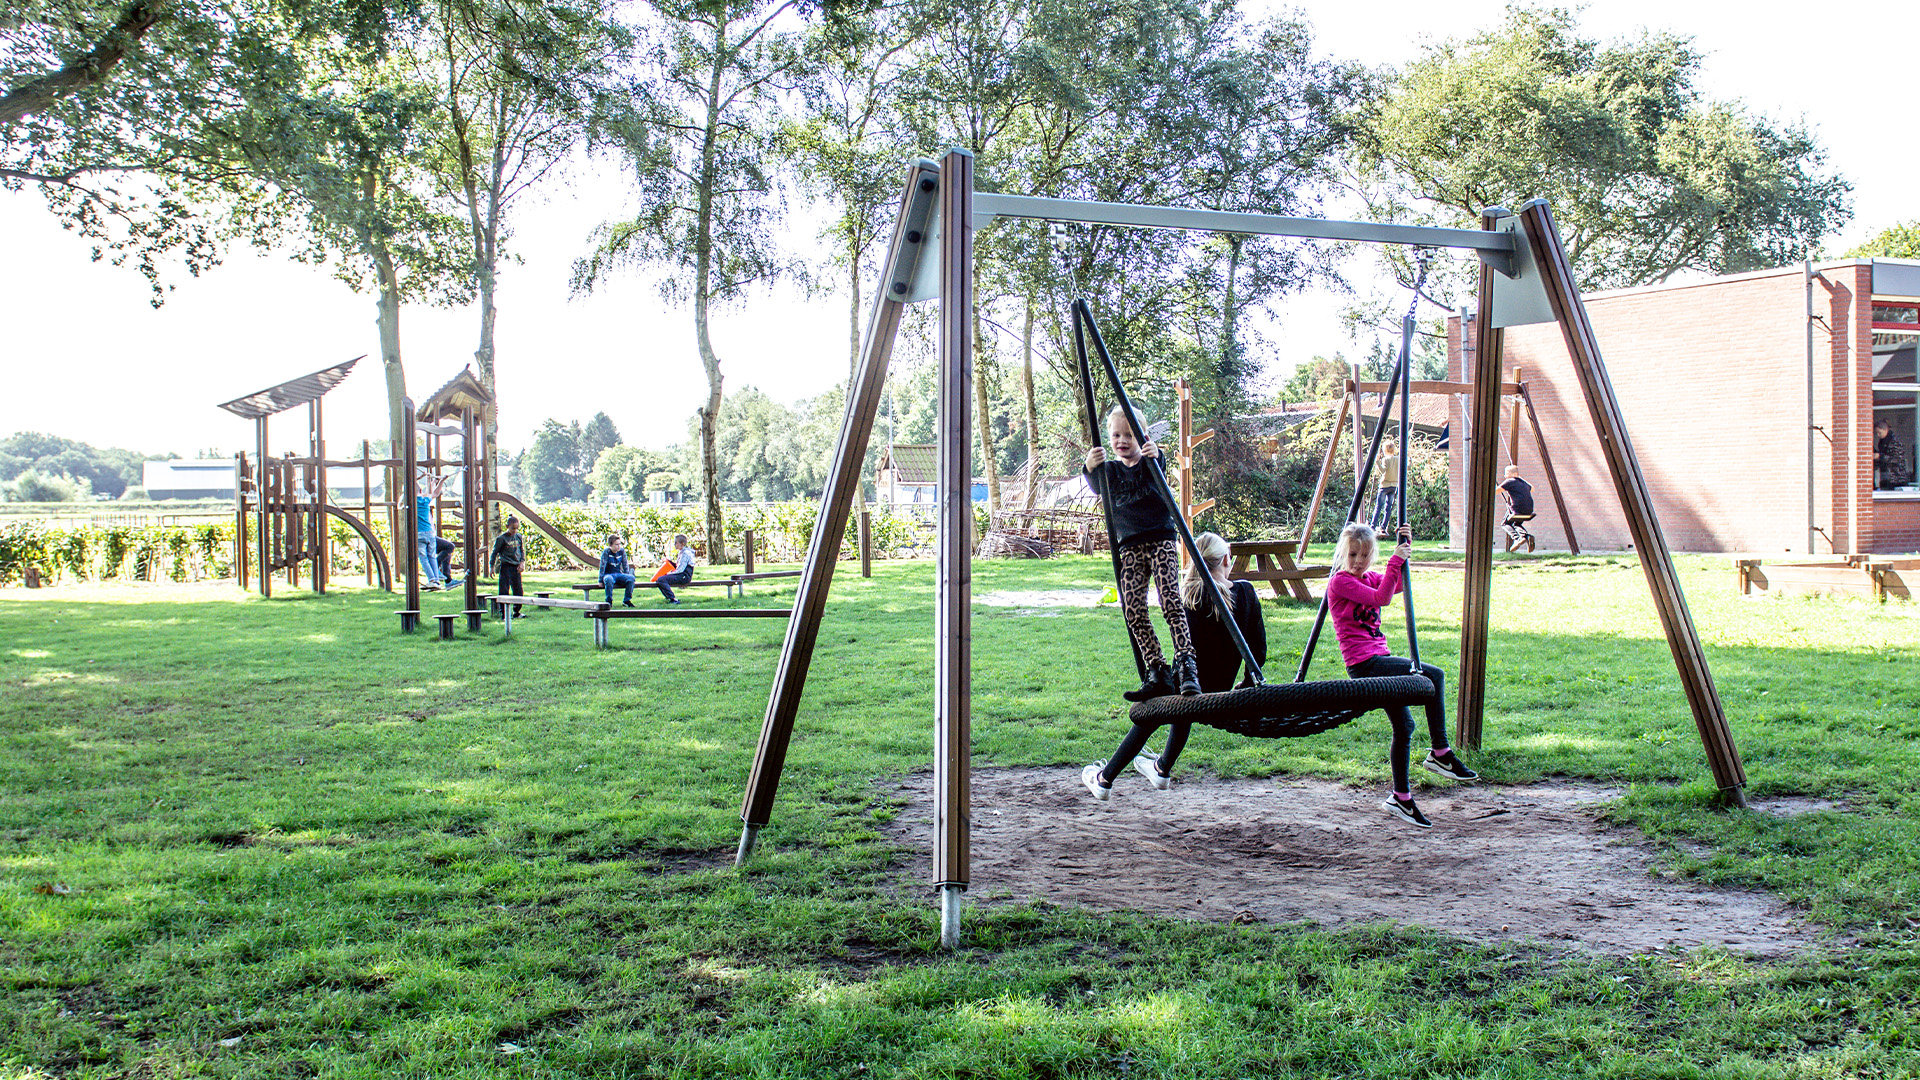 Children are playing at a playground in a park on a sunny day. There is a swing set in the foreground with two children swinging, one in black and one in pink. In the background, other kids are playing on a climbing structure and adults are nearby. Trees and grass surround the area.